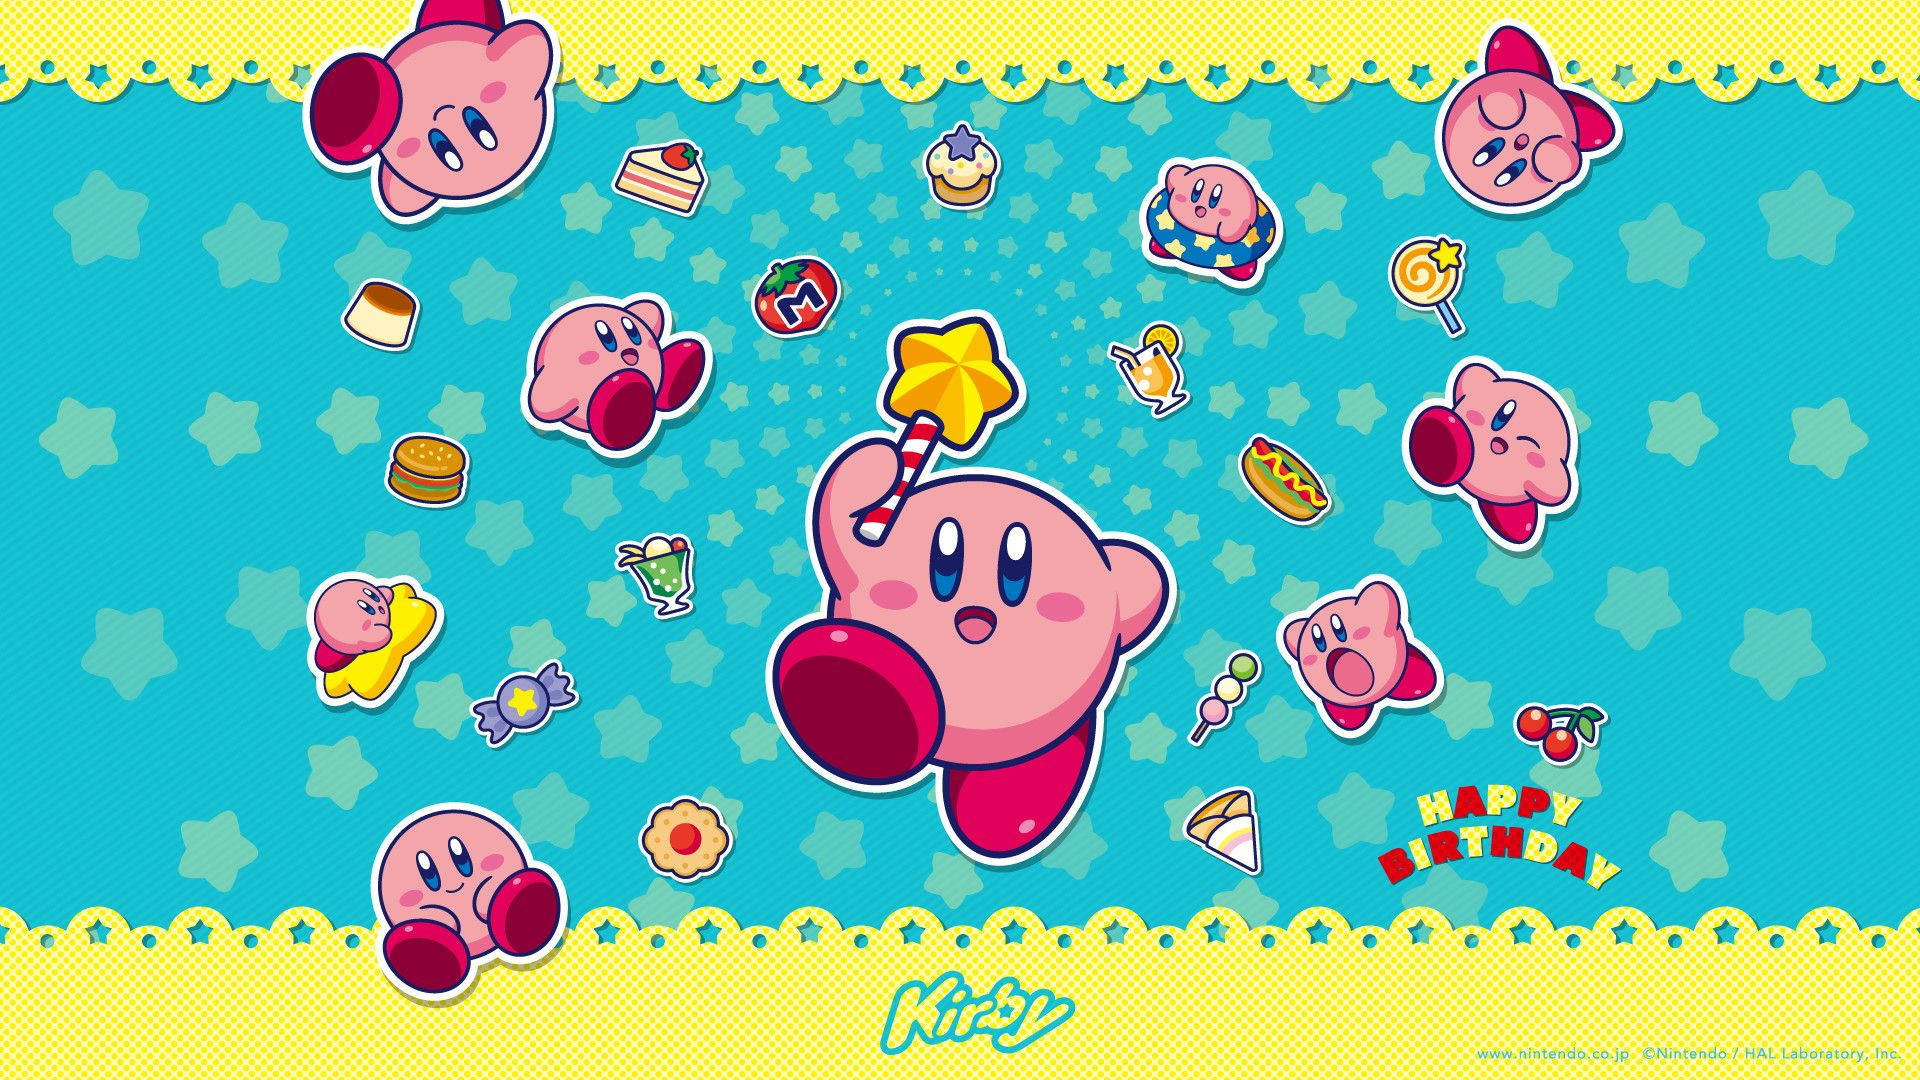 Explore the world of Kirby with this fun and colorful pink aesthetic background. Wallpaper